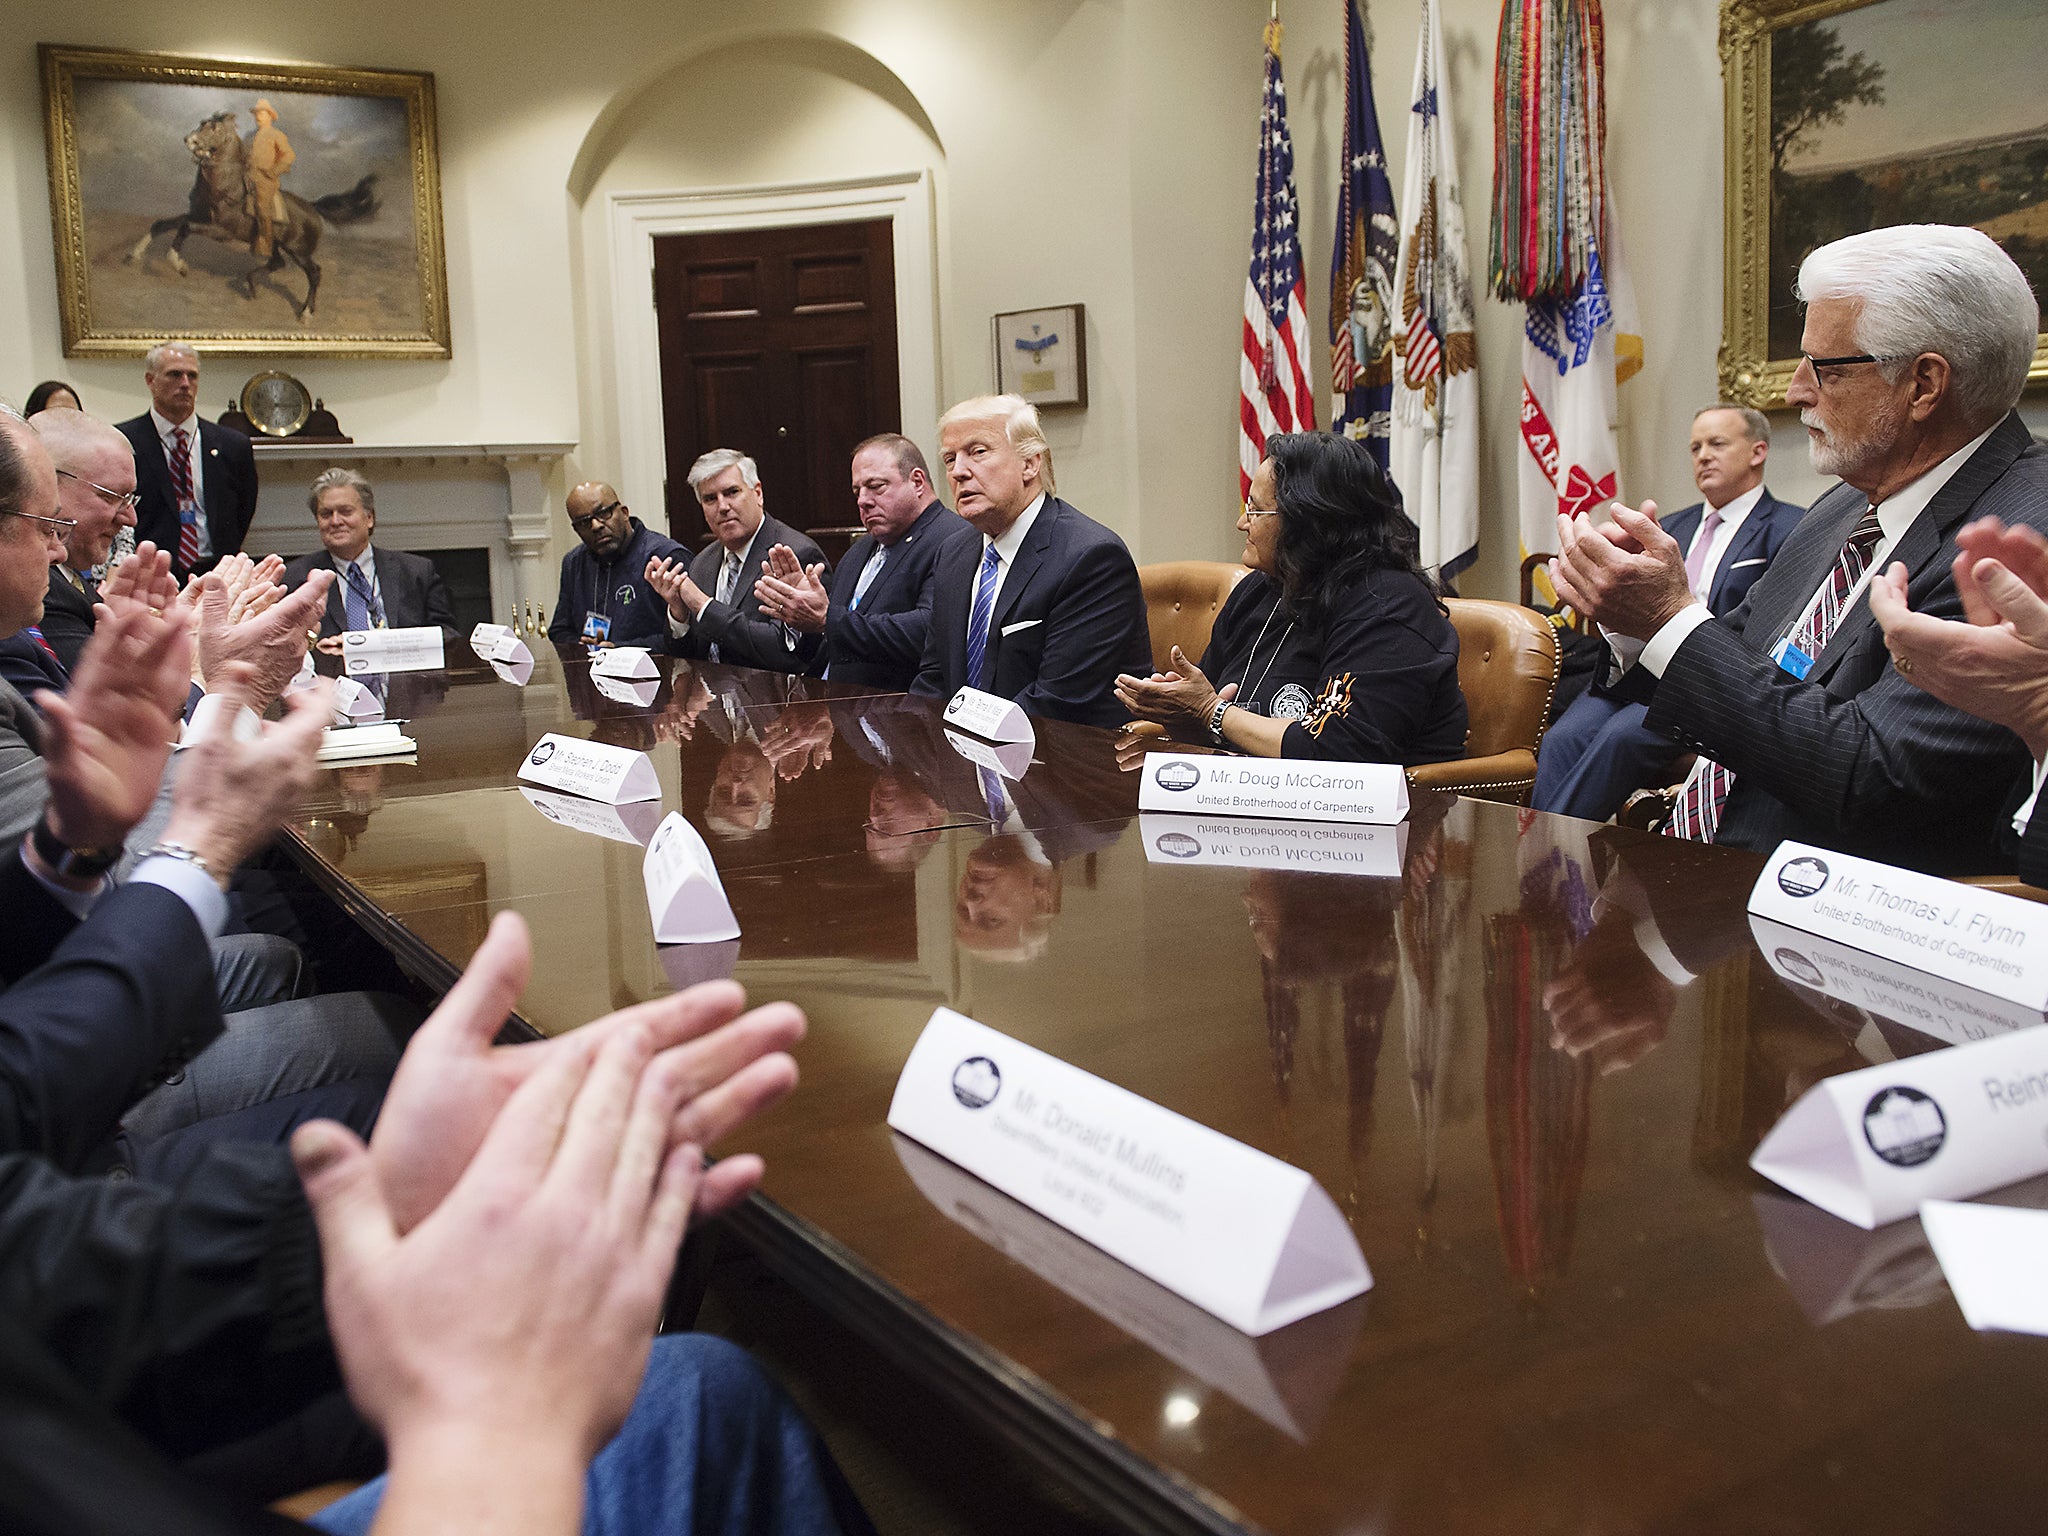 Union leaders applaud US President Donald Trump for signing an executive order withdrawing the US from the Trans-Pacific Partnership negotiations during a meeting in the Roosevelt Room of the White House in Washington DC (Getty Images)